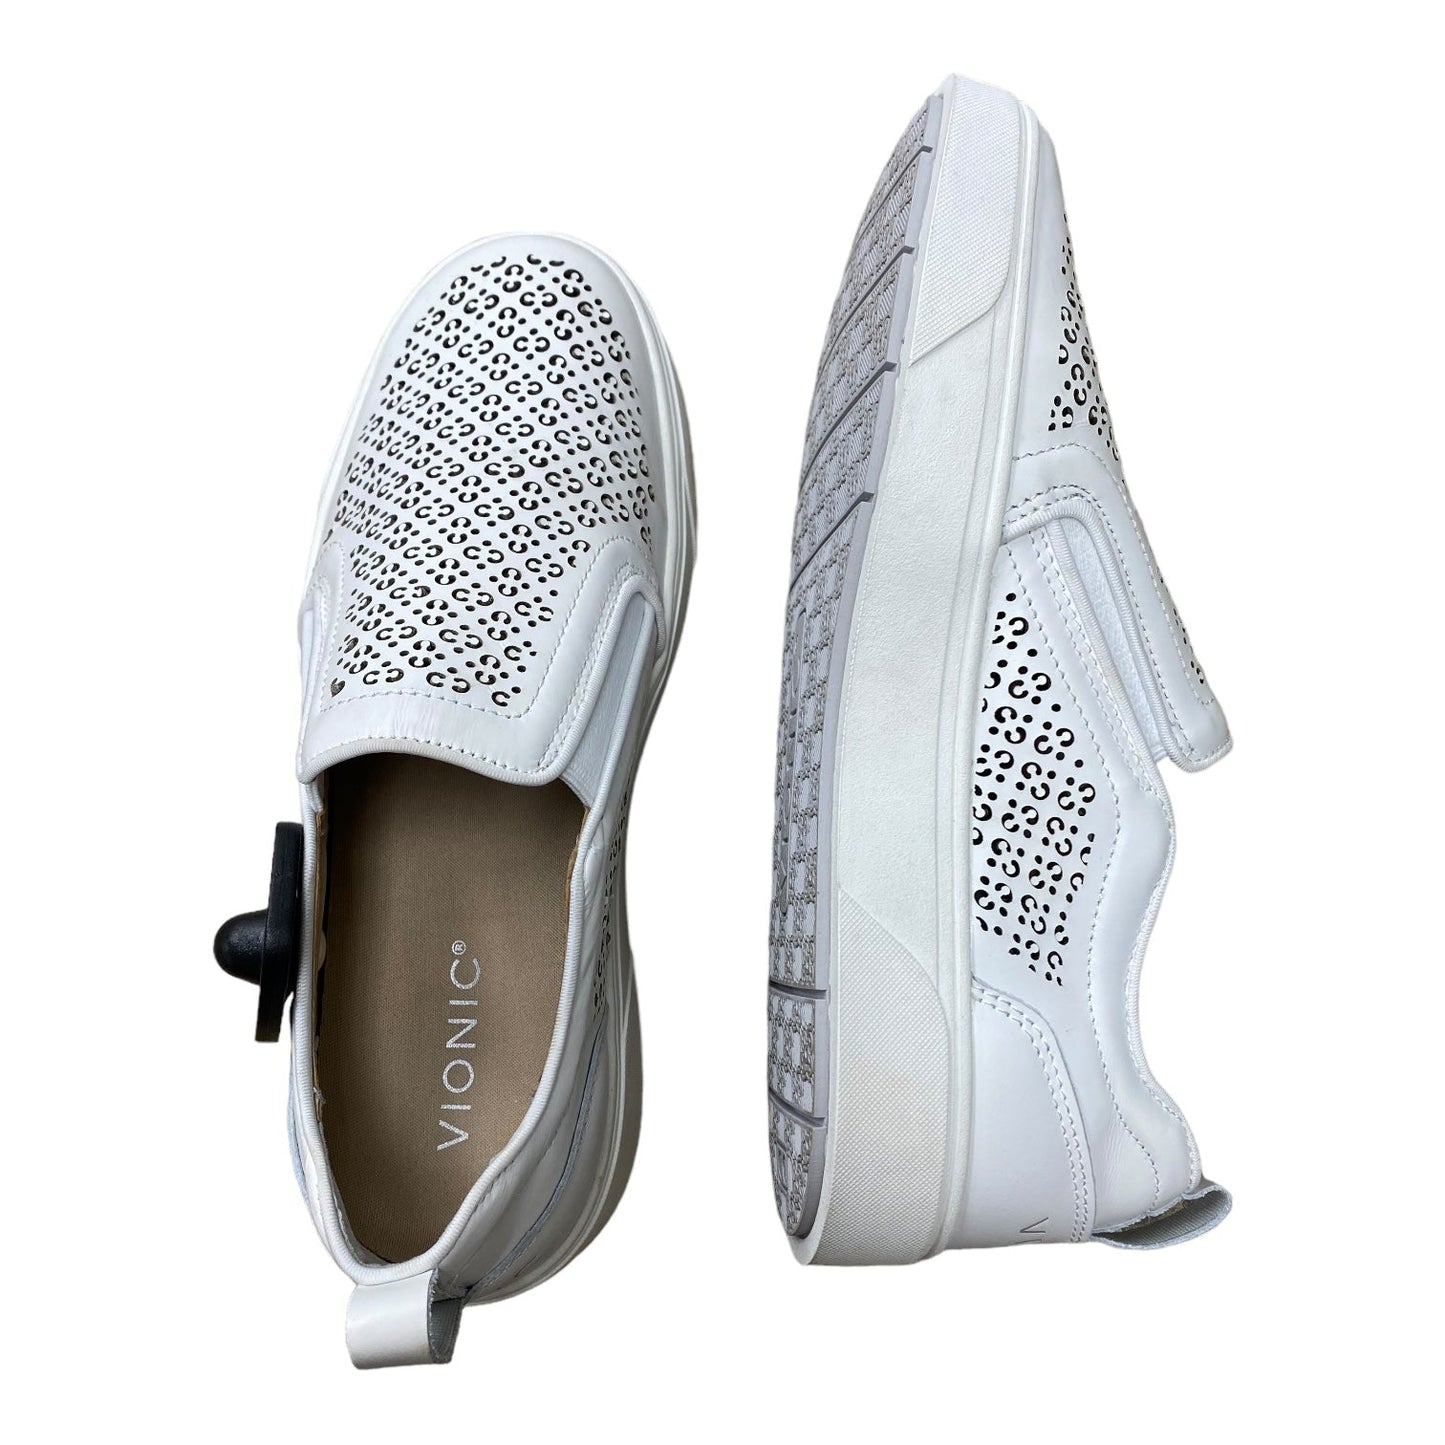 White Shoes Sneakers Vionic, Size 8.5